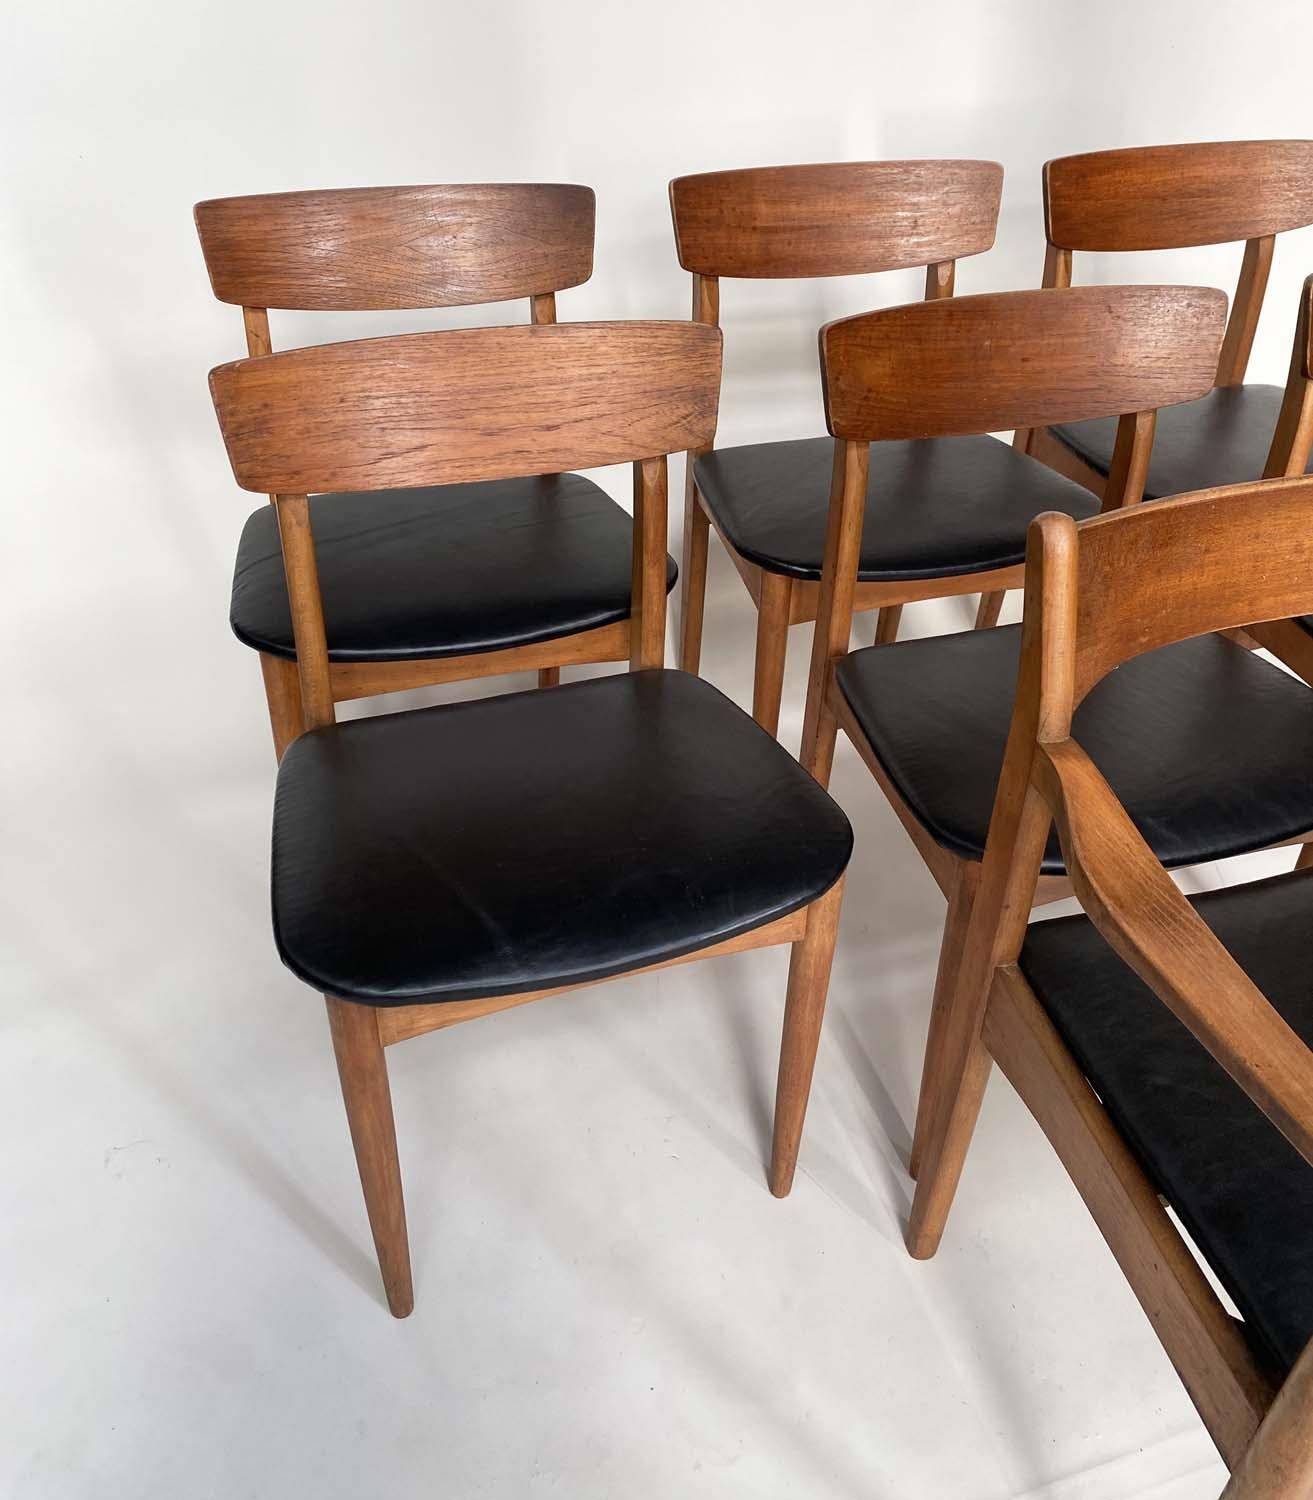 DINING CHAIRS, a set of seven, 1970's teak Danish style with black leather seats and carved backs - Image 3 of 5